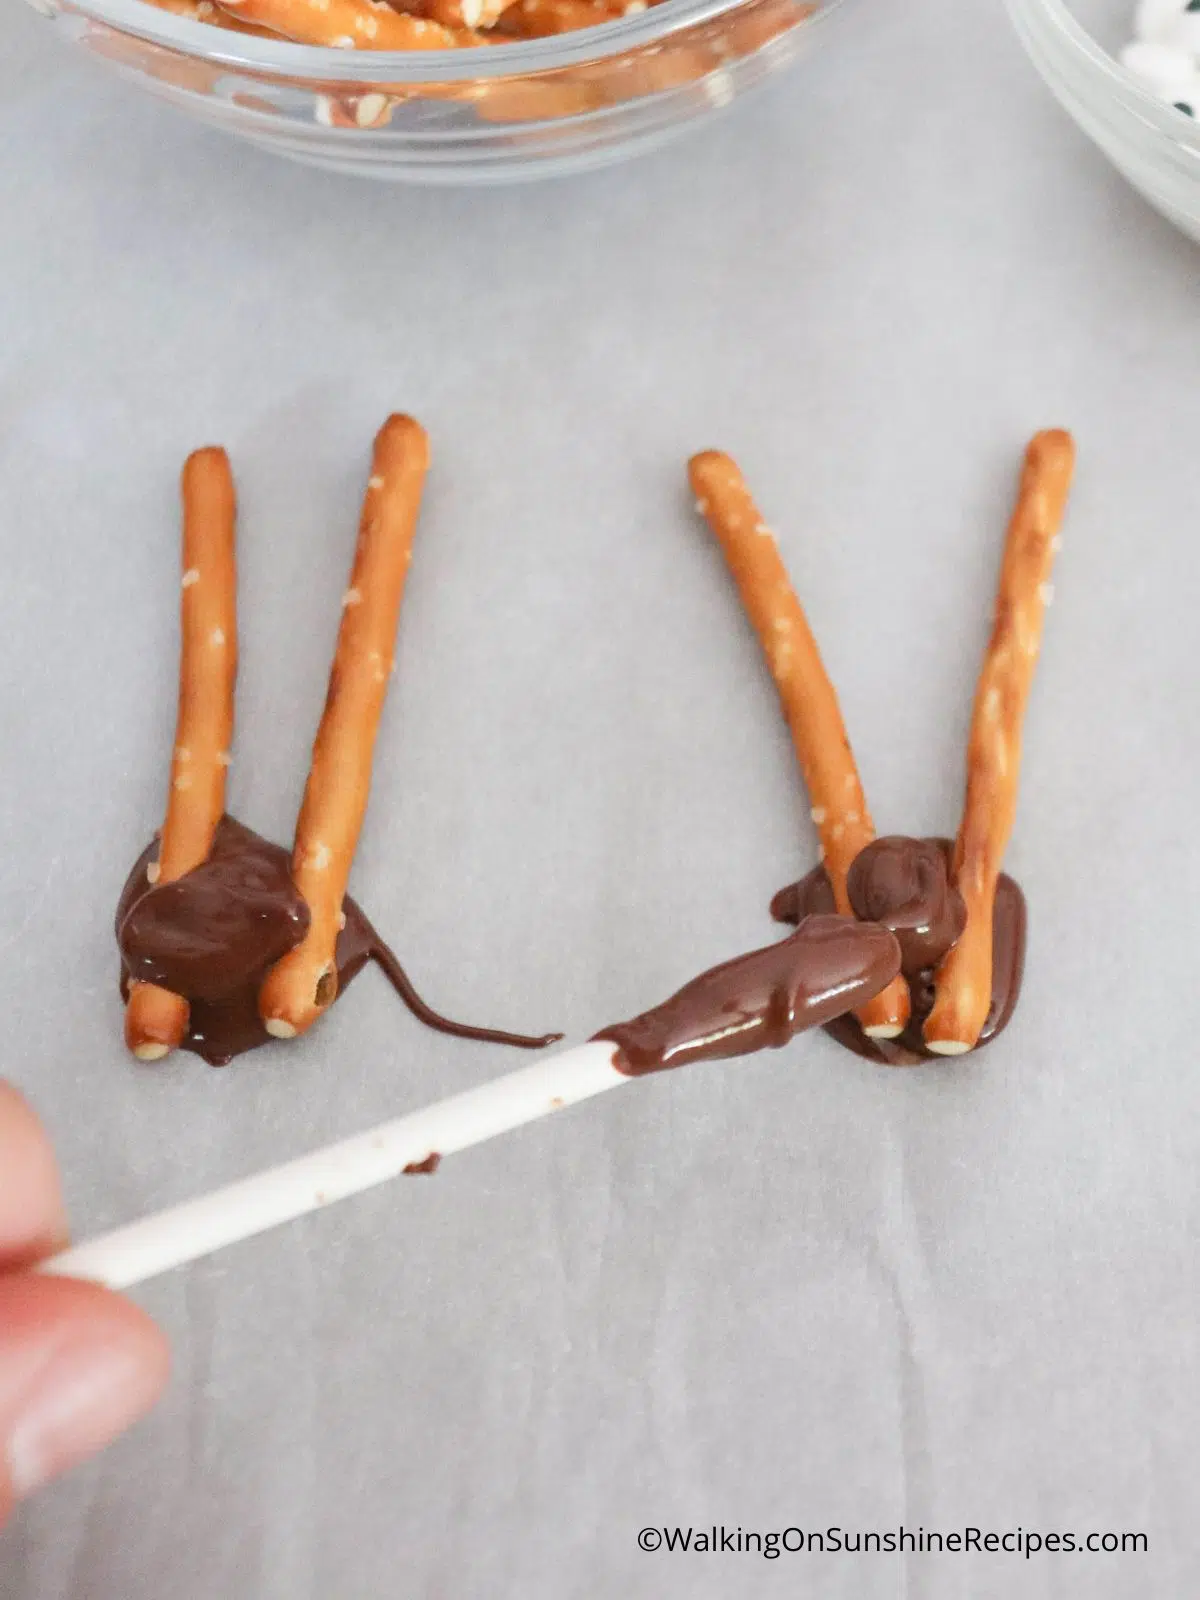 add melted chocolate to the back of pretzel sticks.